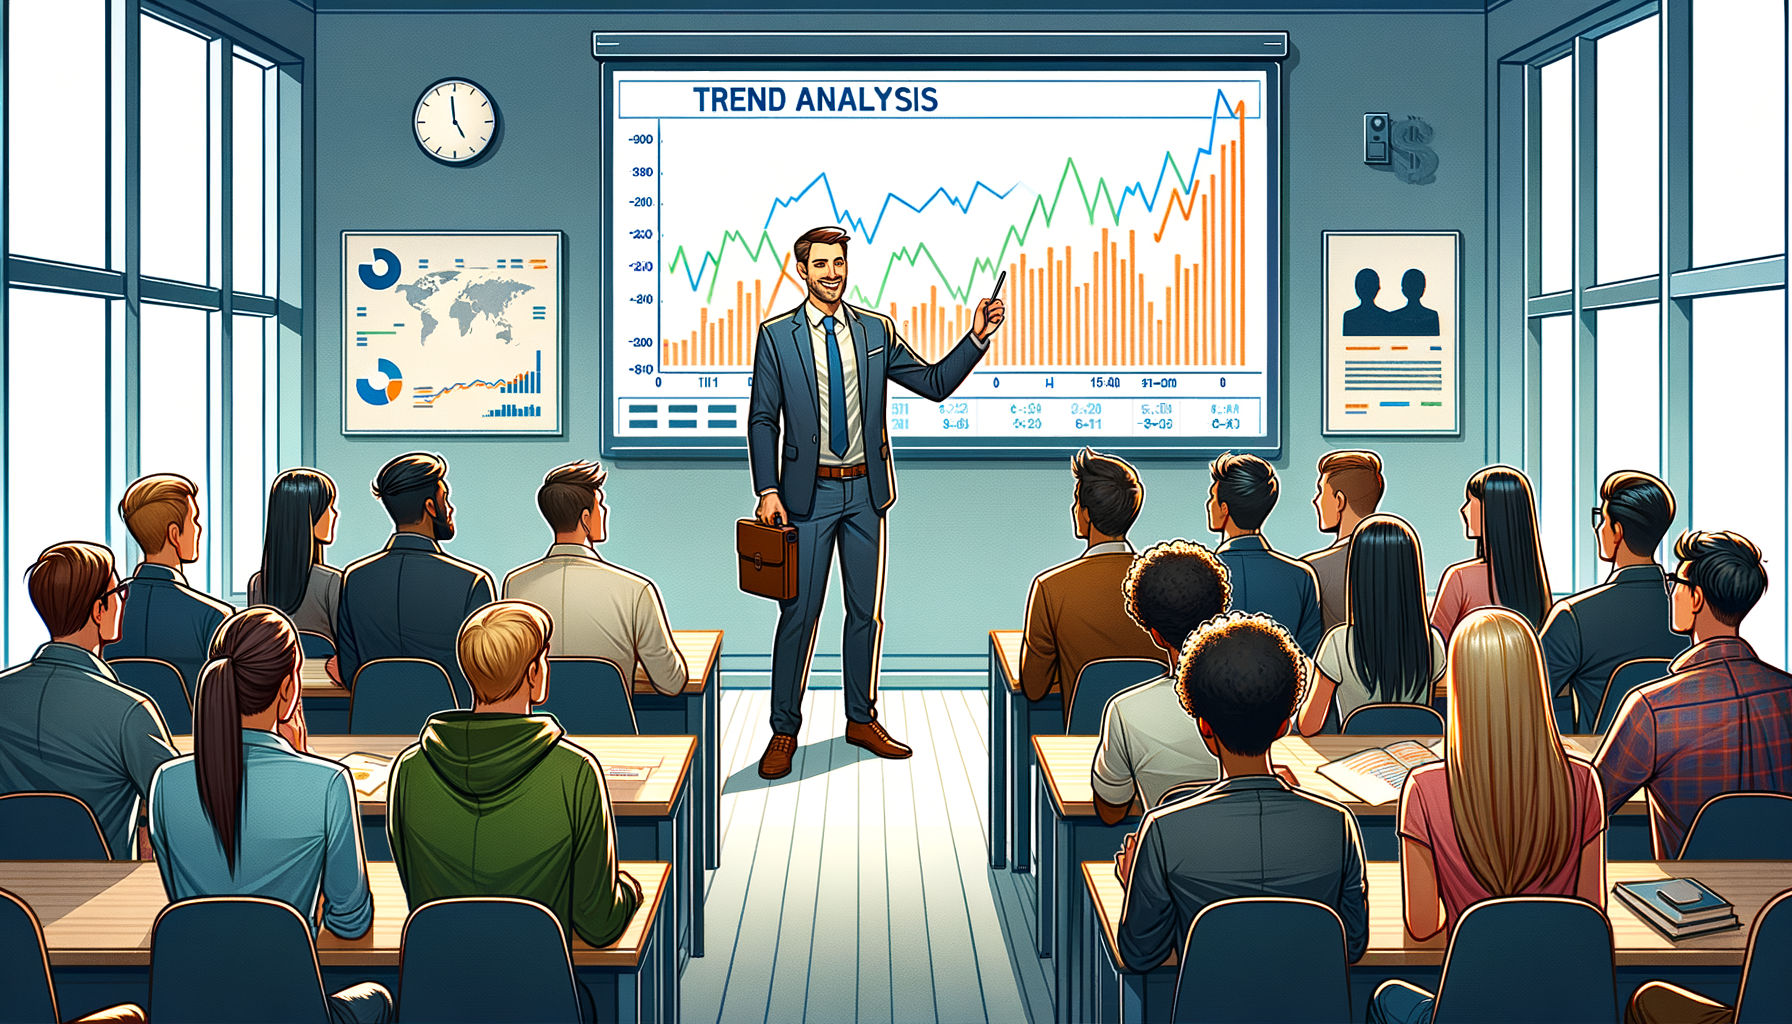 Learning Trend Analysis in an Investment Classroom